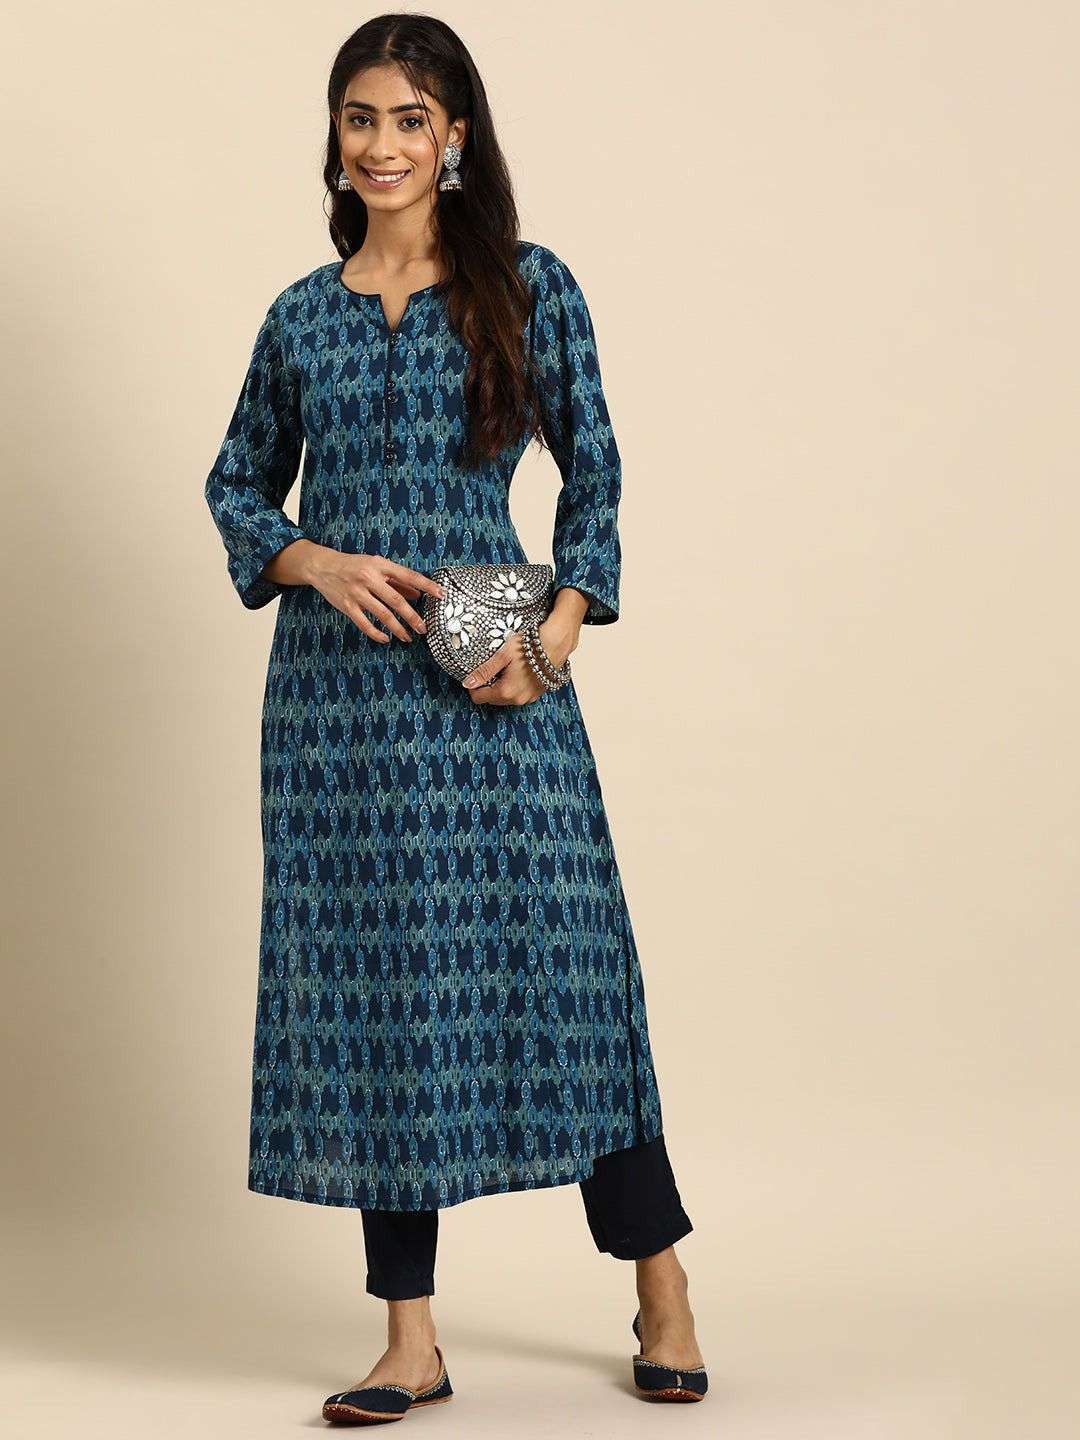 BANDHAN BY S3FOREVER BRAND - TRENDY PRINTED PURE COTTON(60-60) KURTI WITH  JAIPURI PRINTS - WHOLESALER AND DEALER